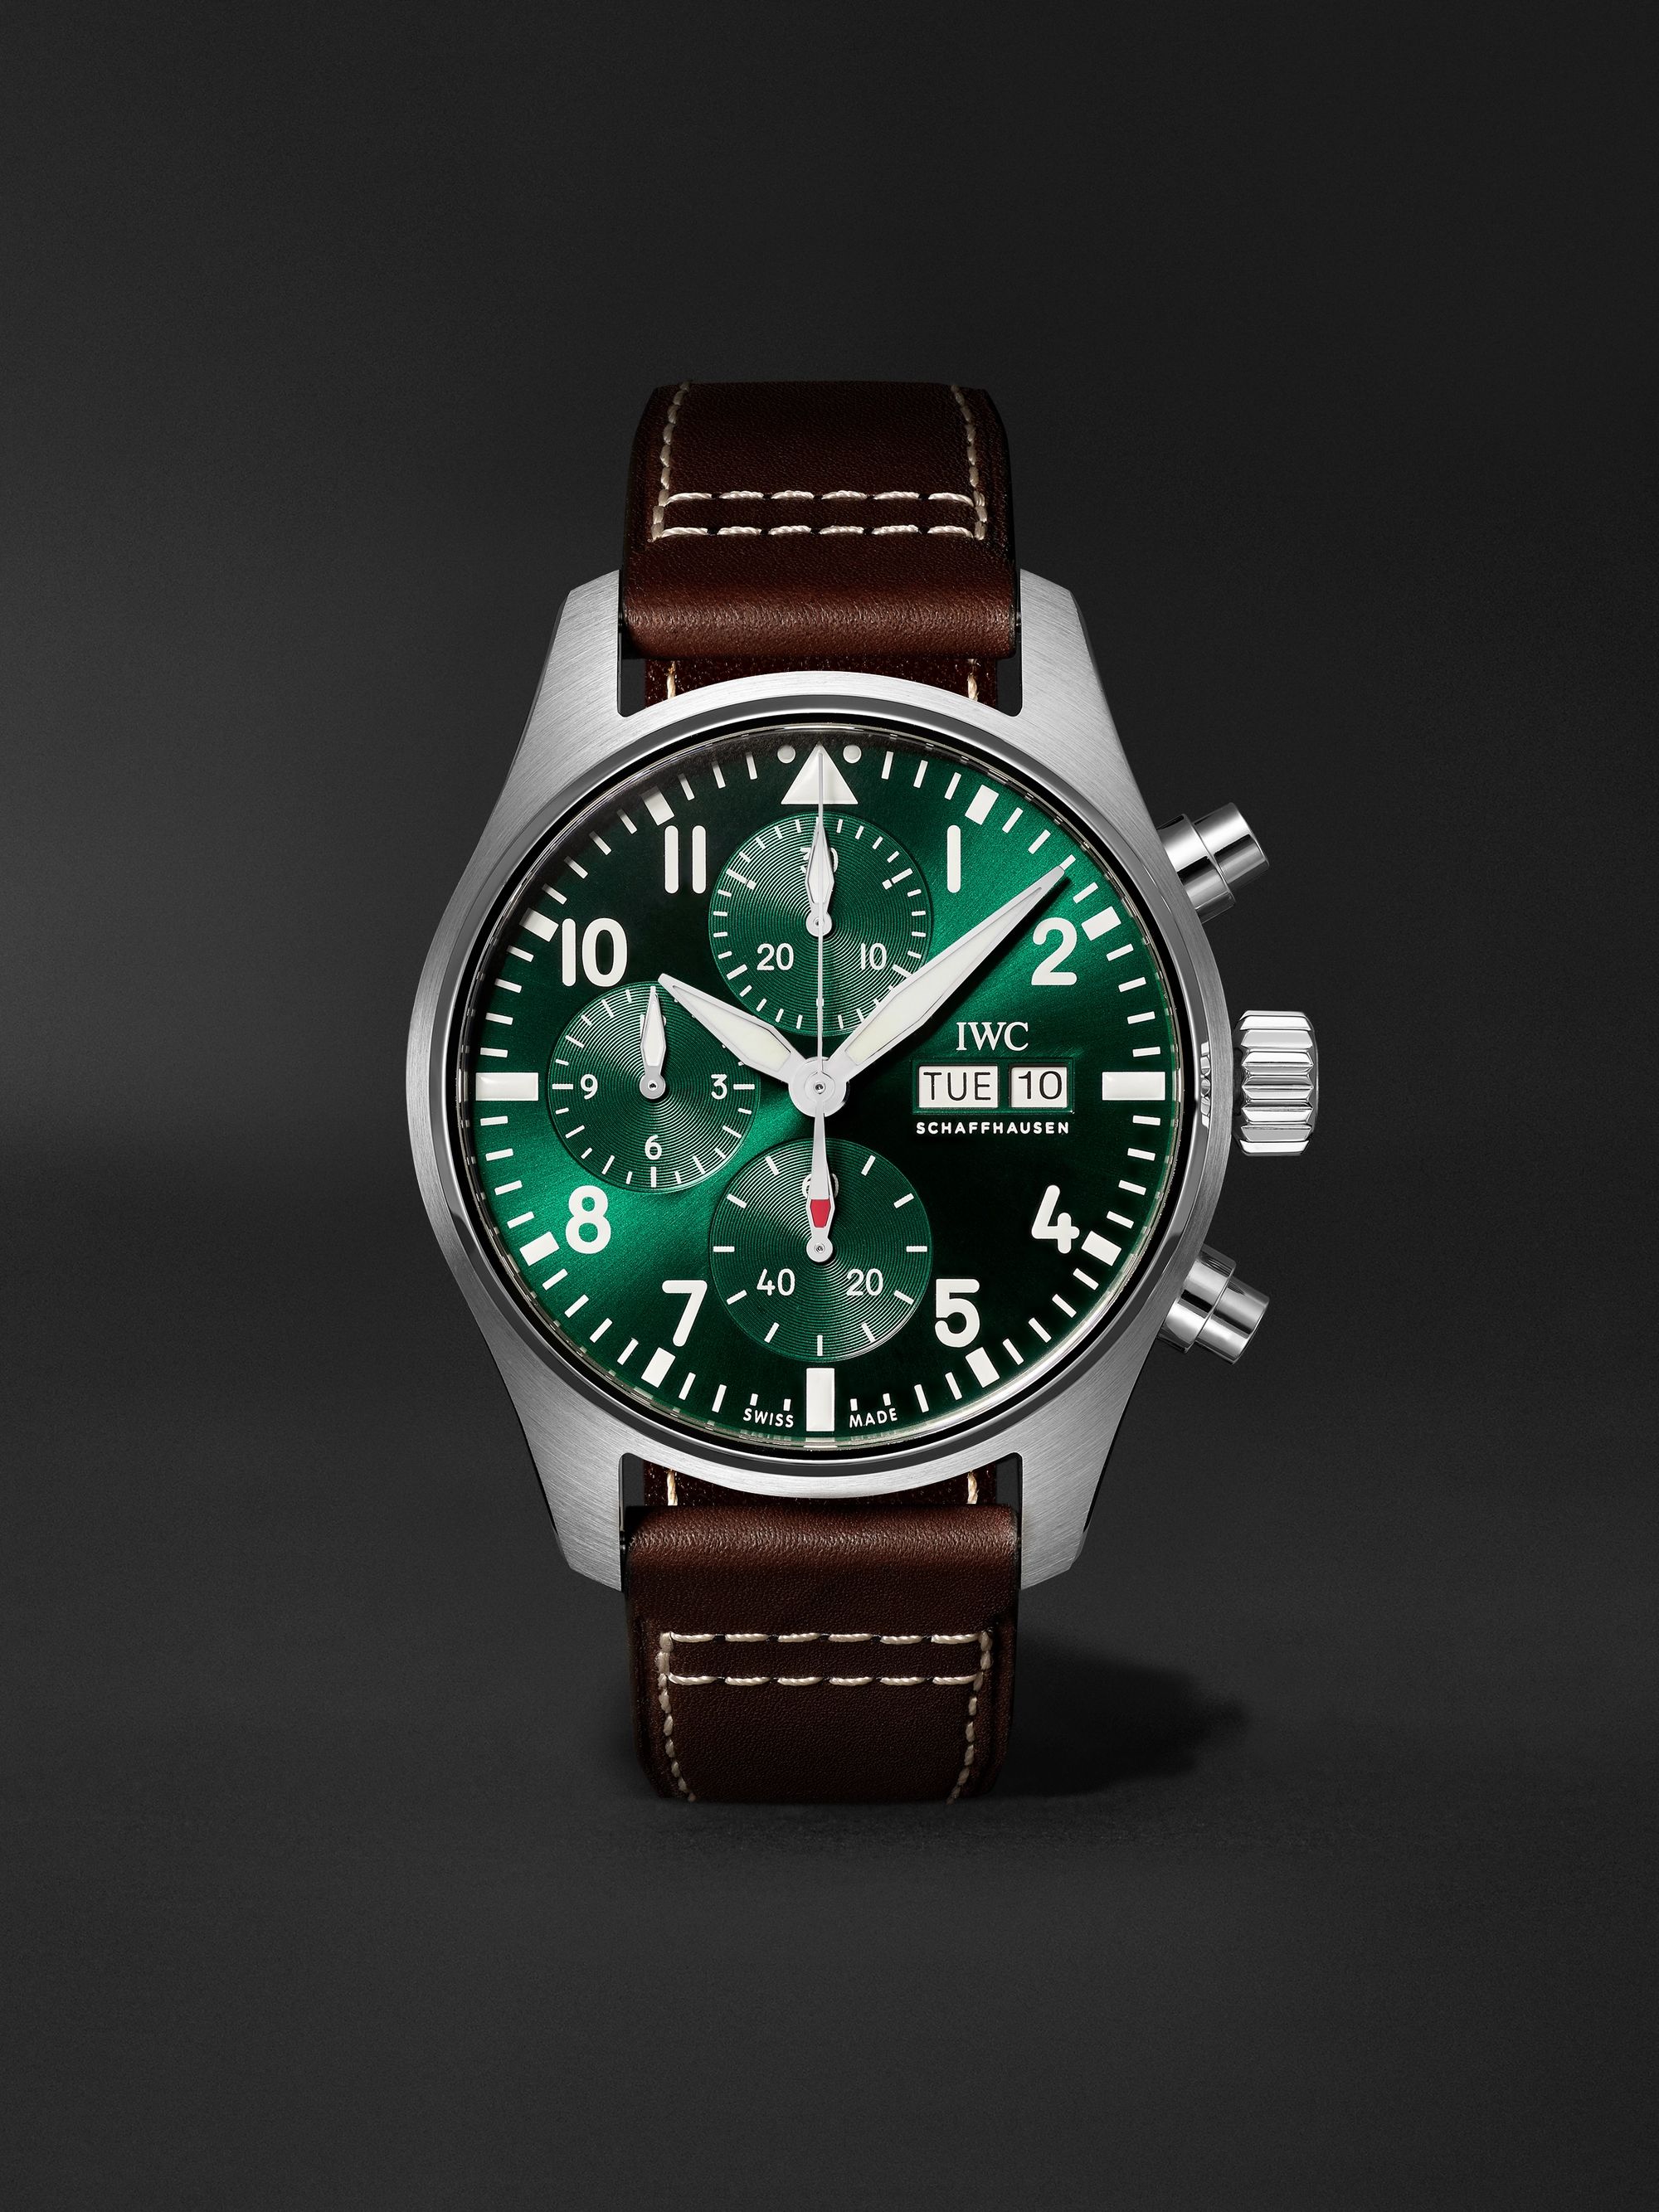 IWC SCHAFFHAUSEN Pilot's Automatic Chronograph 41mm Stainless Steel and Leather Watch, Ref. No. IW388103